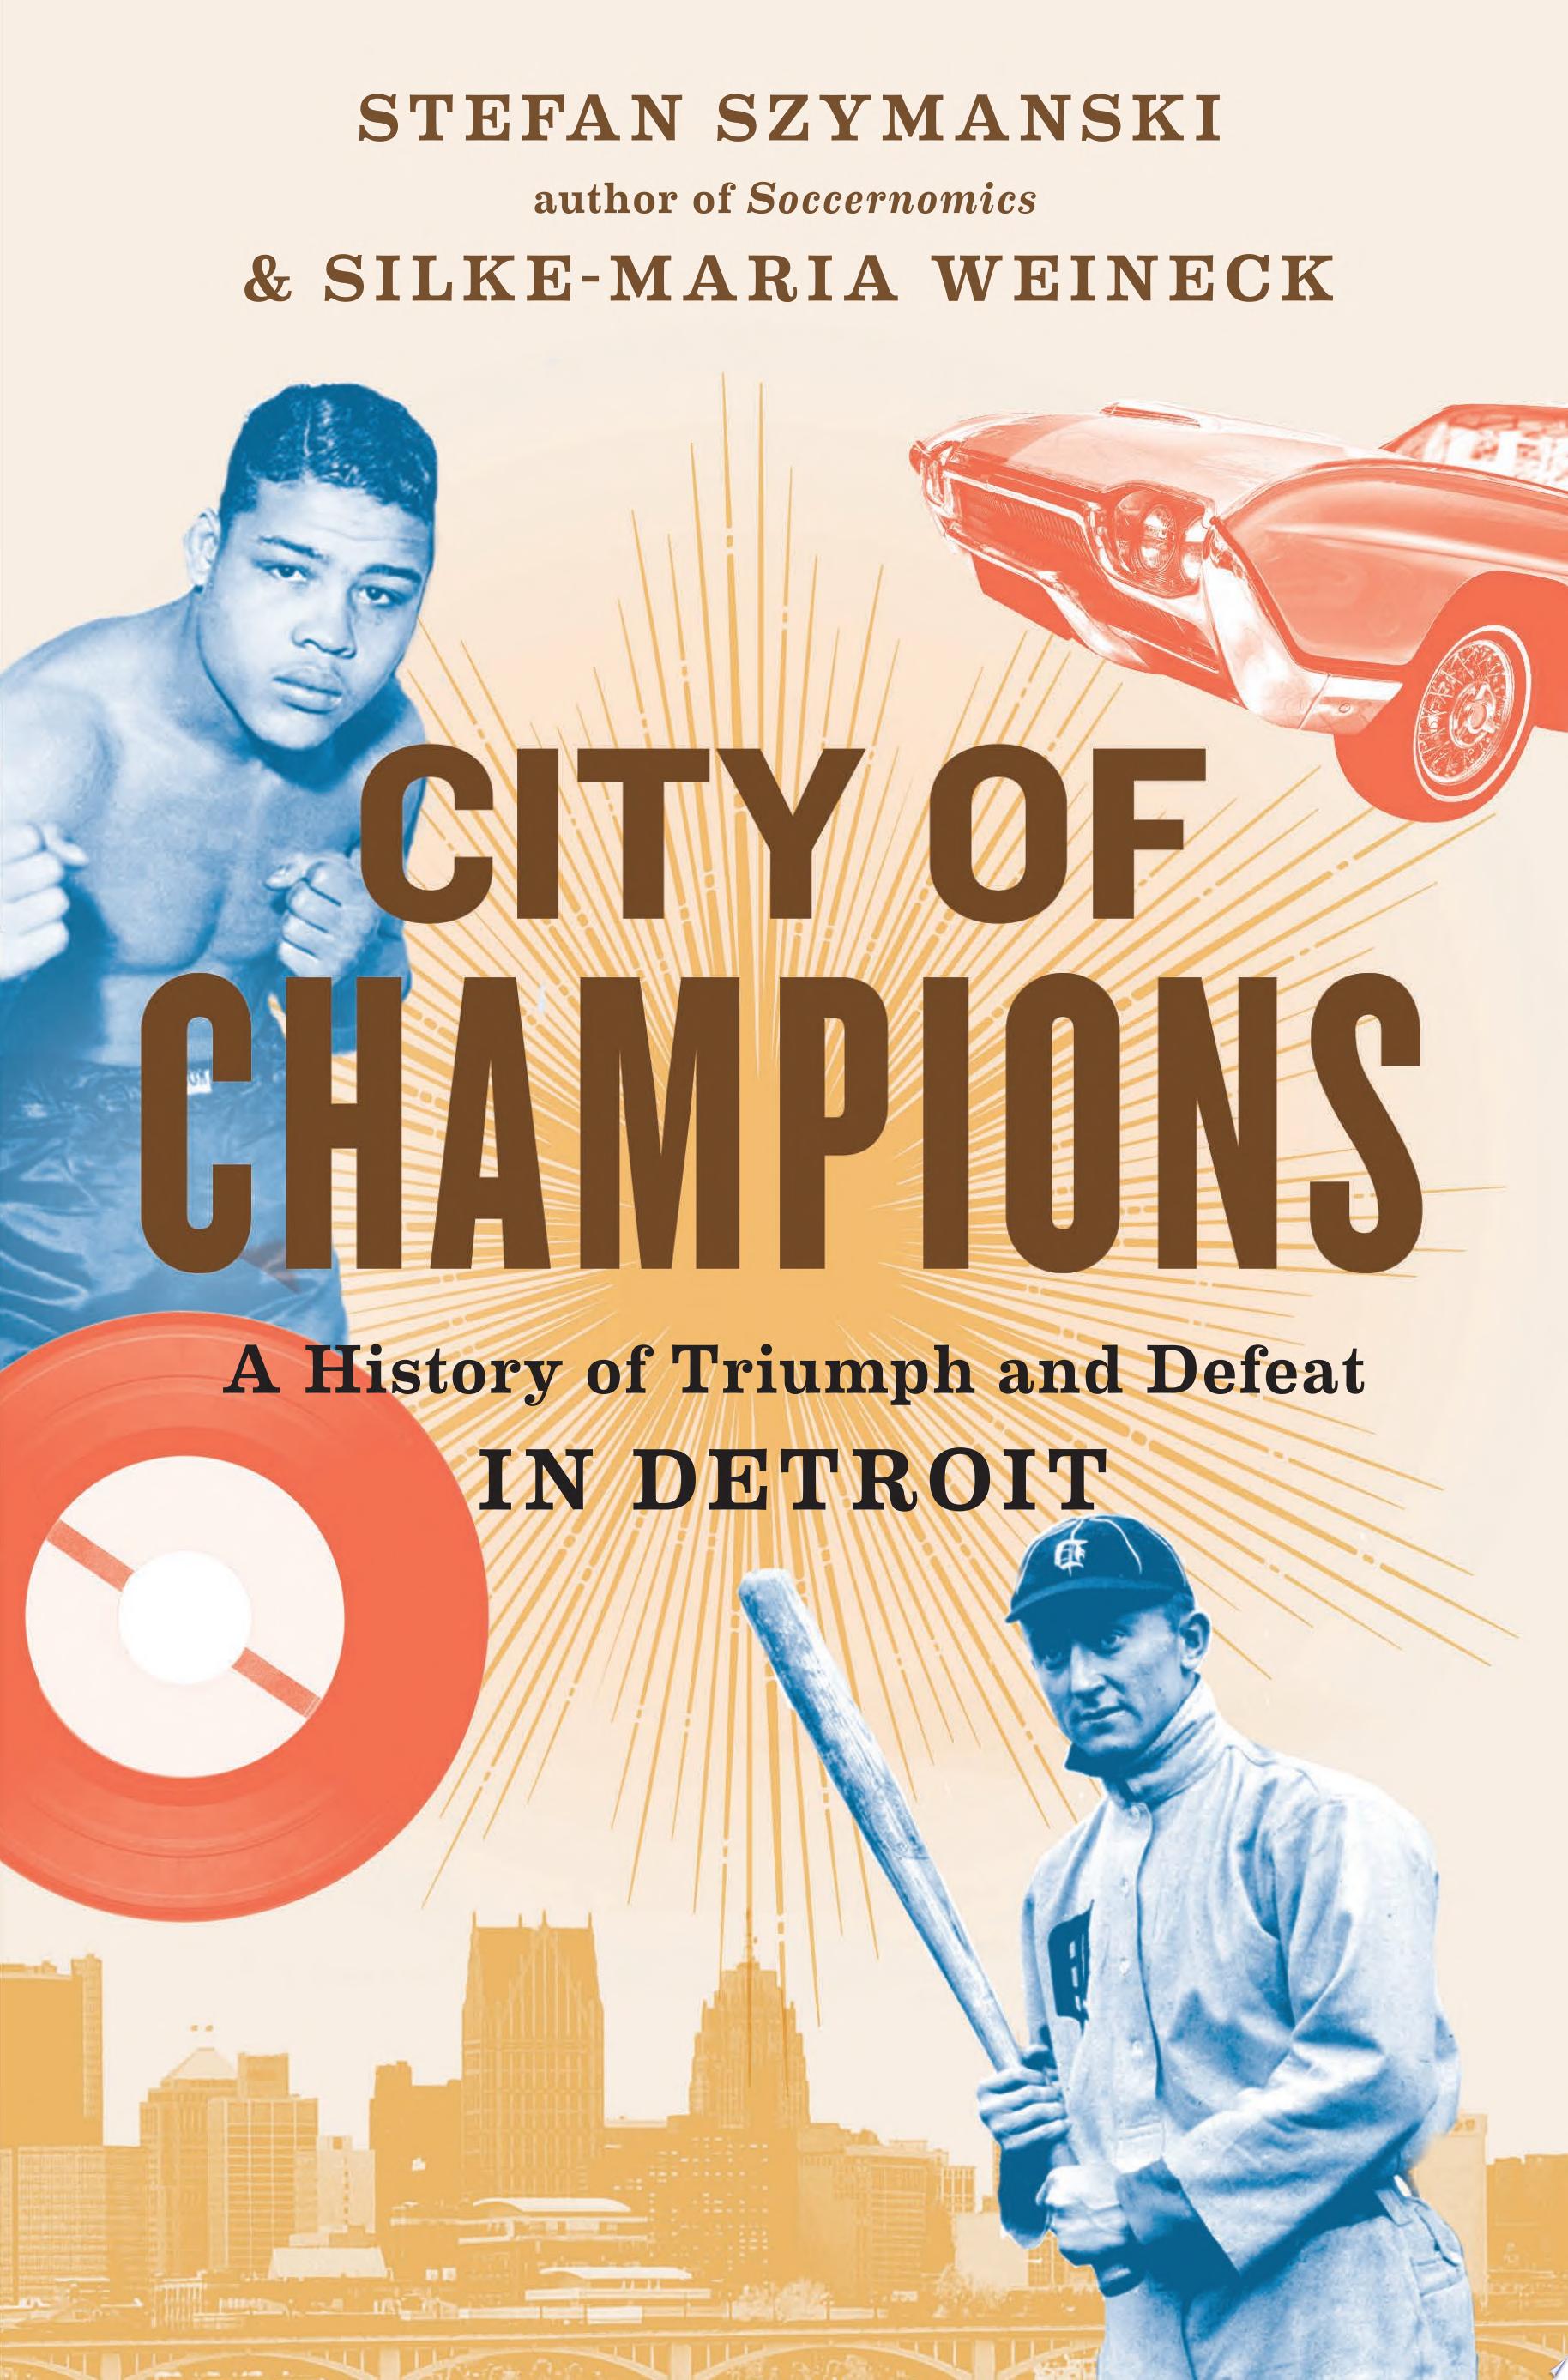 Image for "City of Champions"